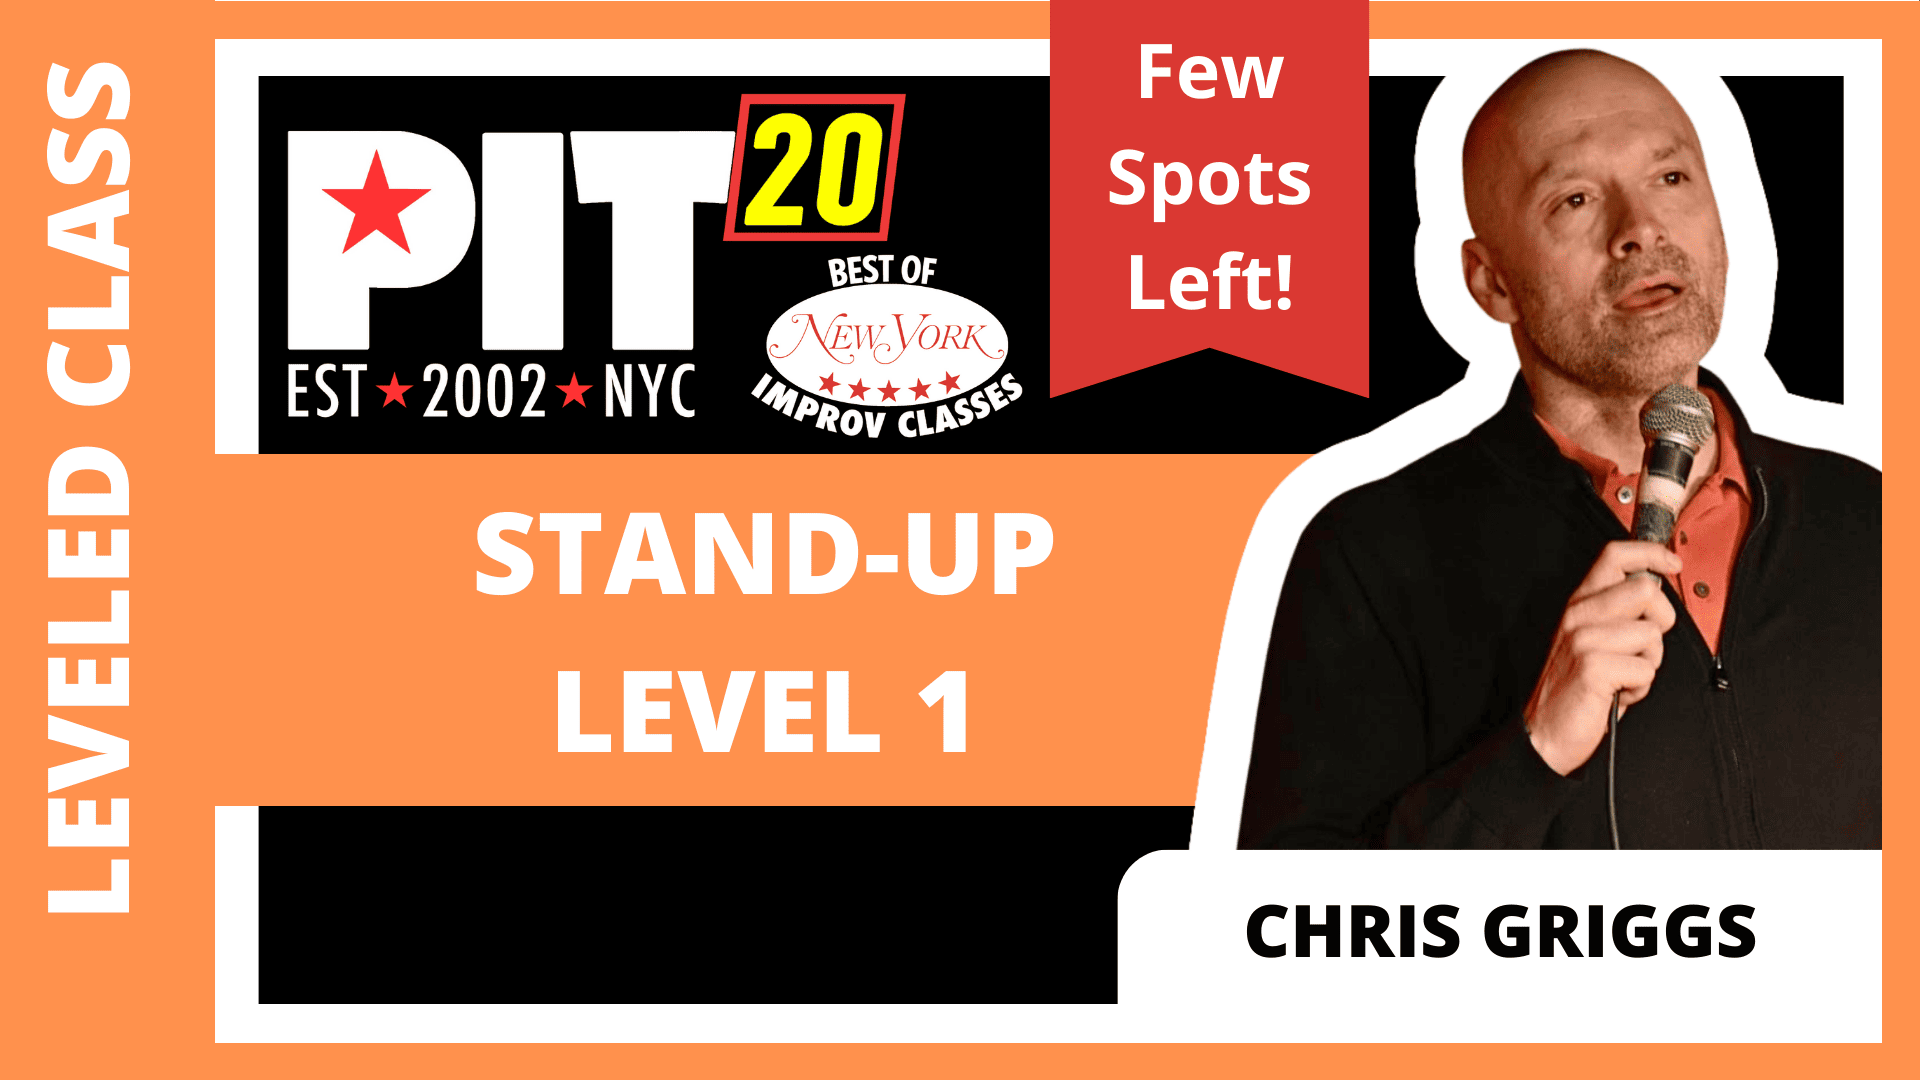 FEW SPOTS LEFT - Stand-Up Level 1 - Chris Griggs